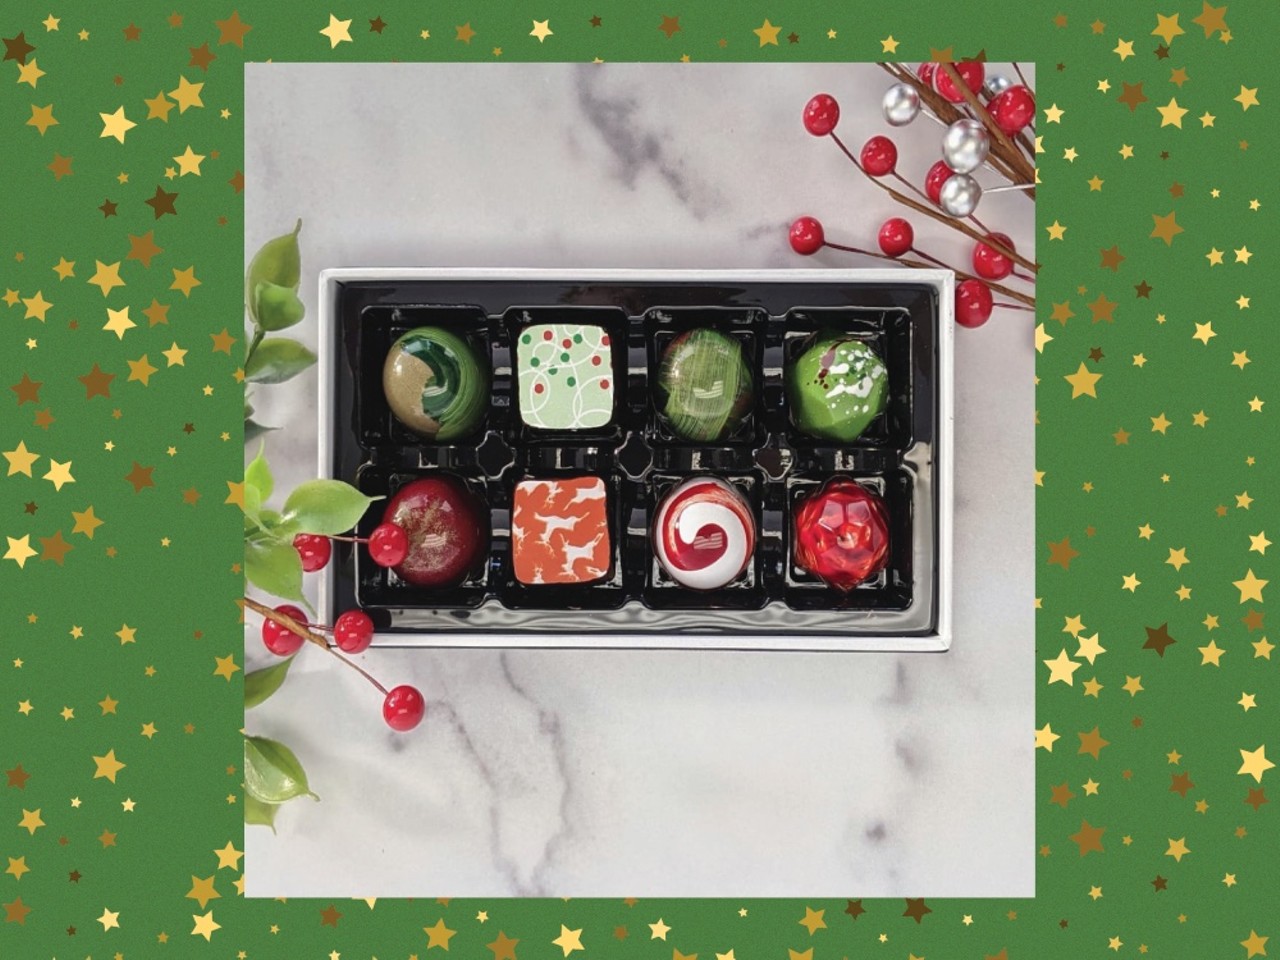 Eight Piece Bonbon Box from Bijoux STL: $18
(13014 Manchester Road, , bijoux-chocolates.square.site)
Don&#146;t be fooled by these little pieces of gemlike art, these bonbons are totally edible and crafted right here in St. Louis at Bijoux. Add a pop of color to your holiday food spread and indulge in the tasty sweets. These bonbons come in four, eight, twelve, sixteen, and 24 piece boxes.
Photo credit: Bijoux Handcrafted Chocolates